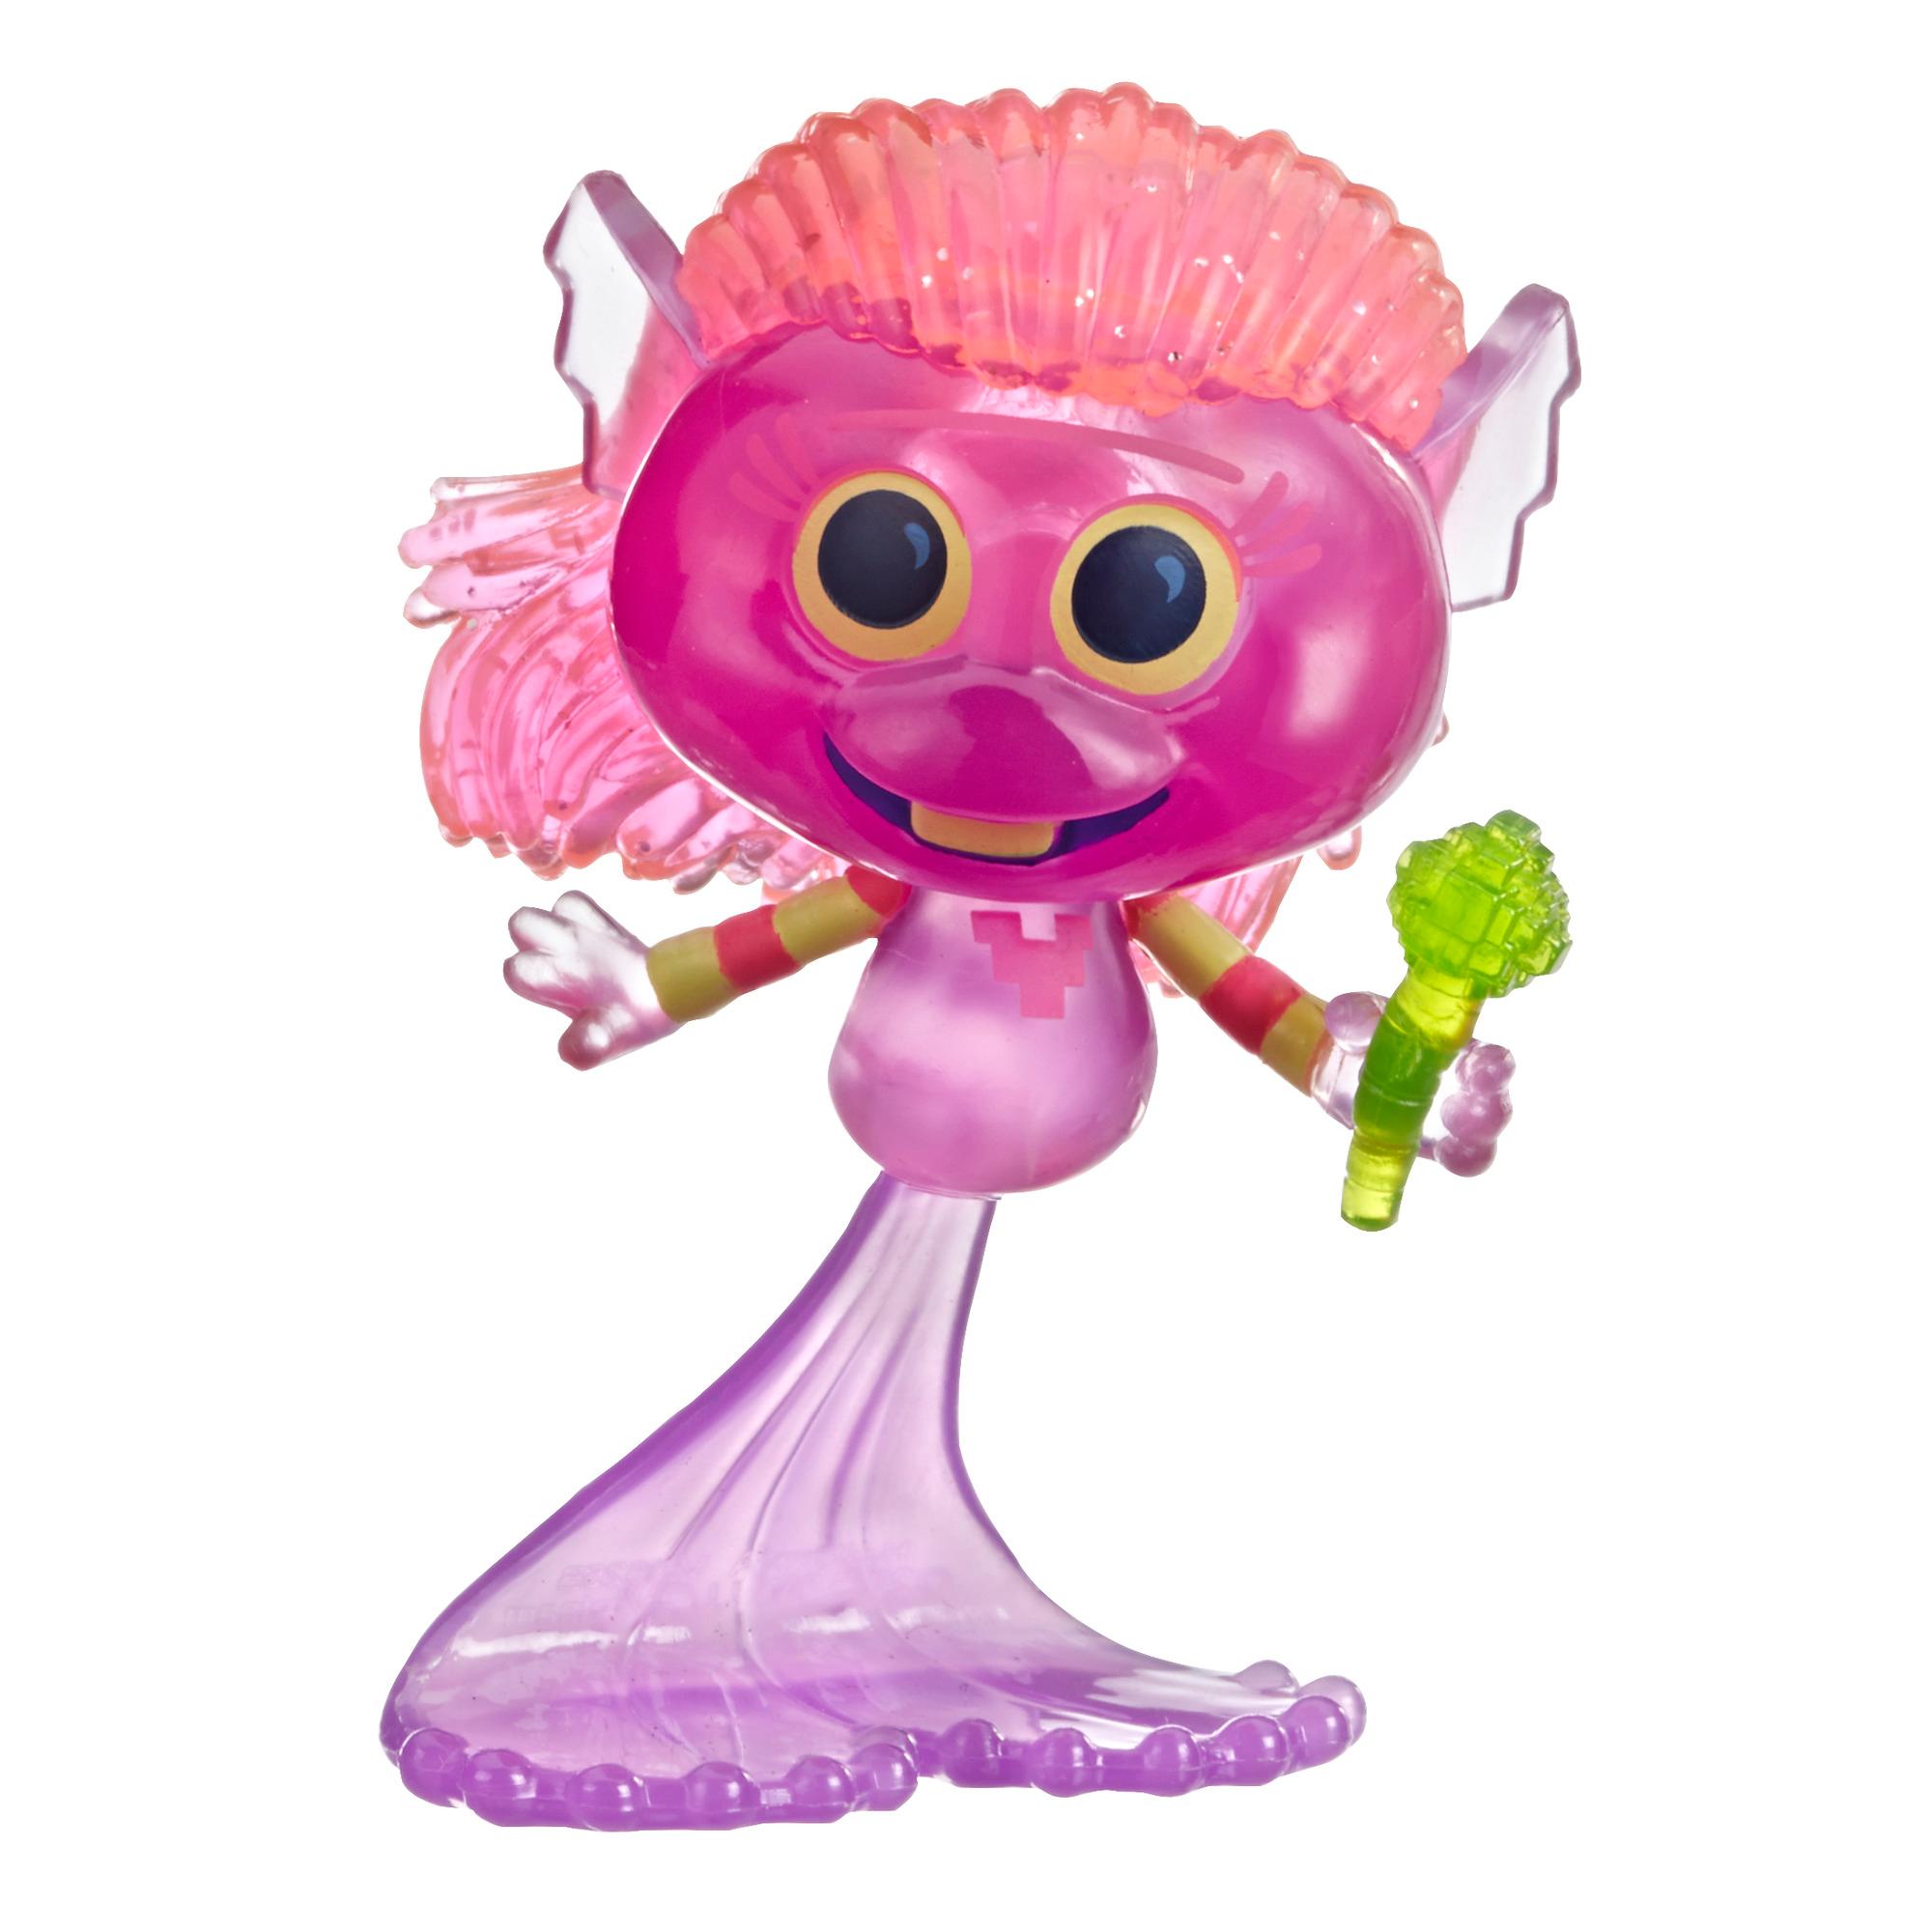 DreamWorks Trolls World Tour Mermaid, Doll Figure with Microphone Accessory, Toy Inspired by the Movie Trolls World Tour